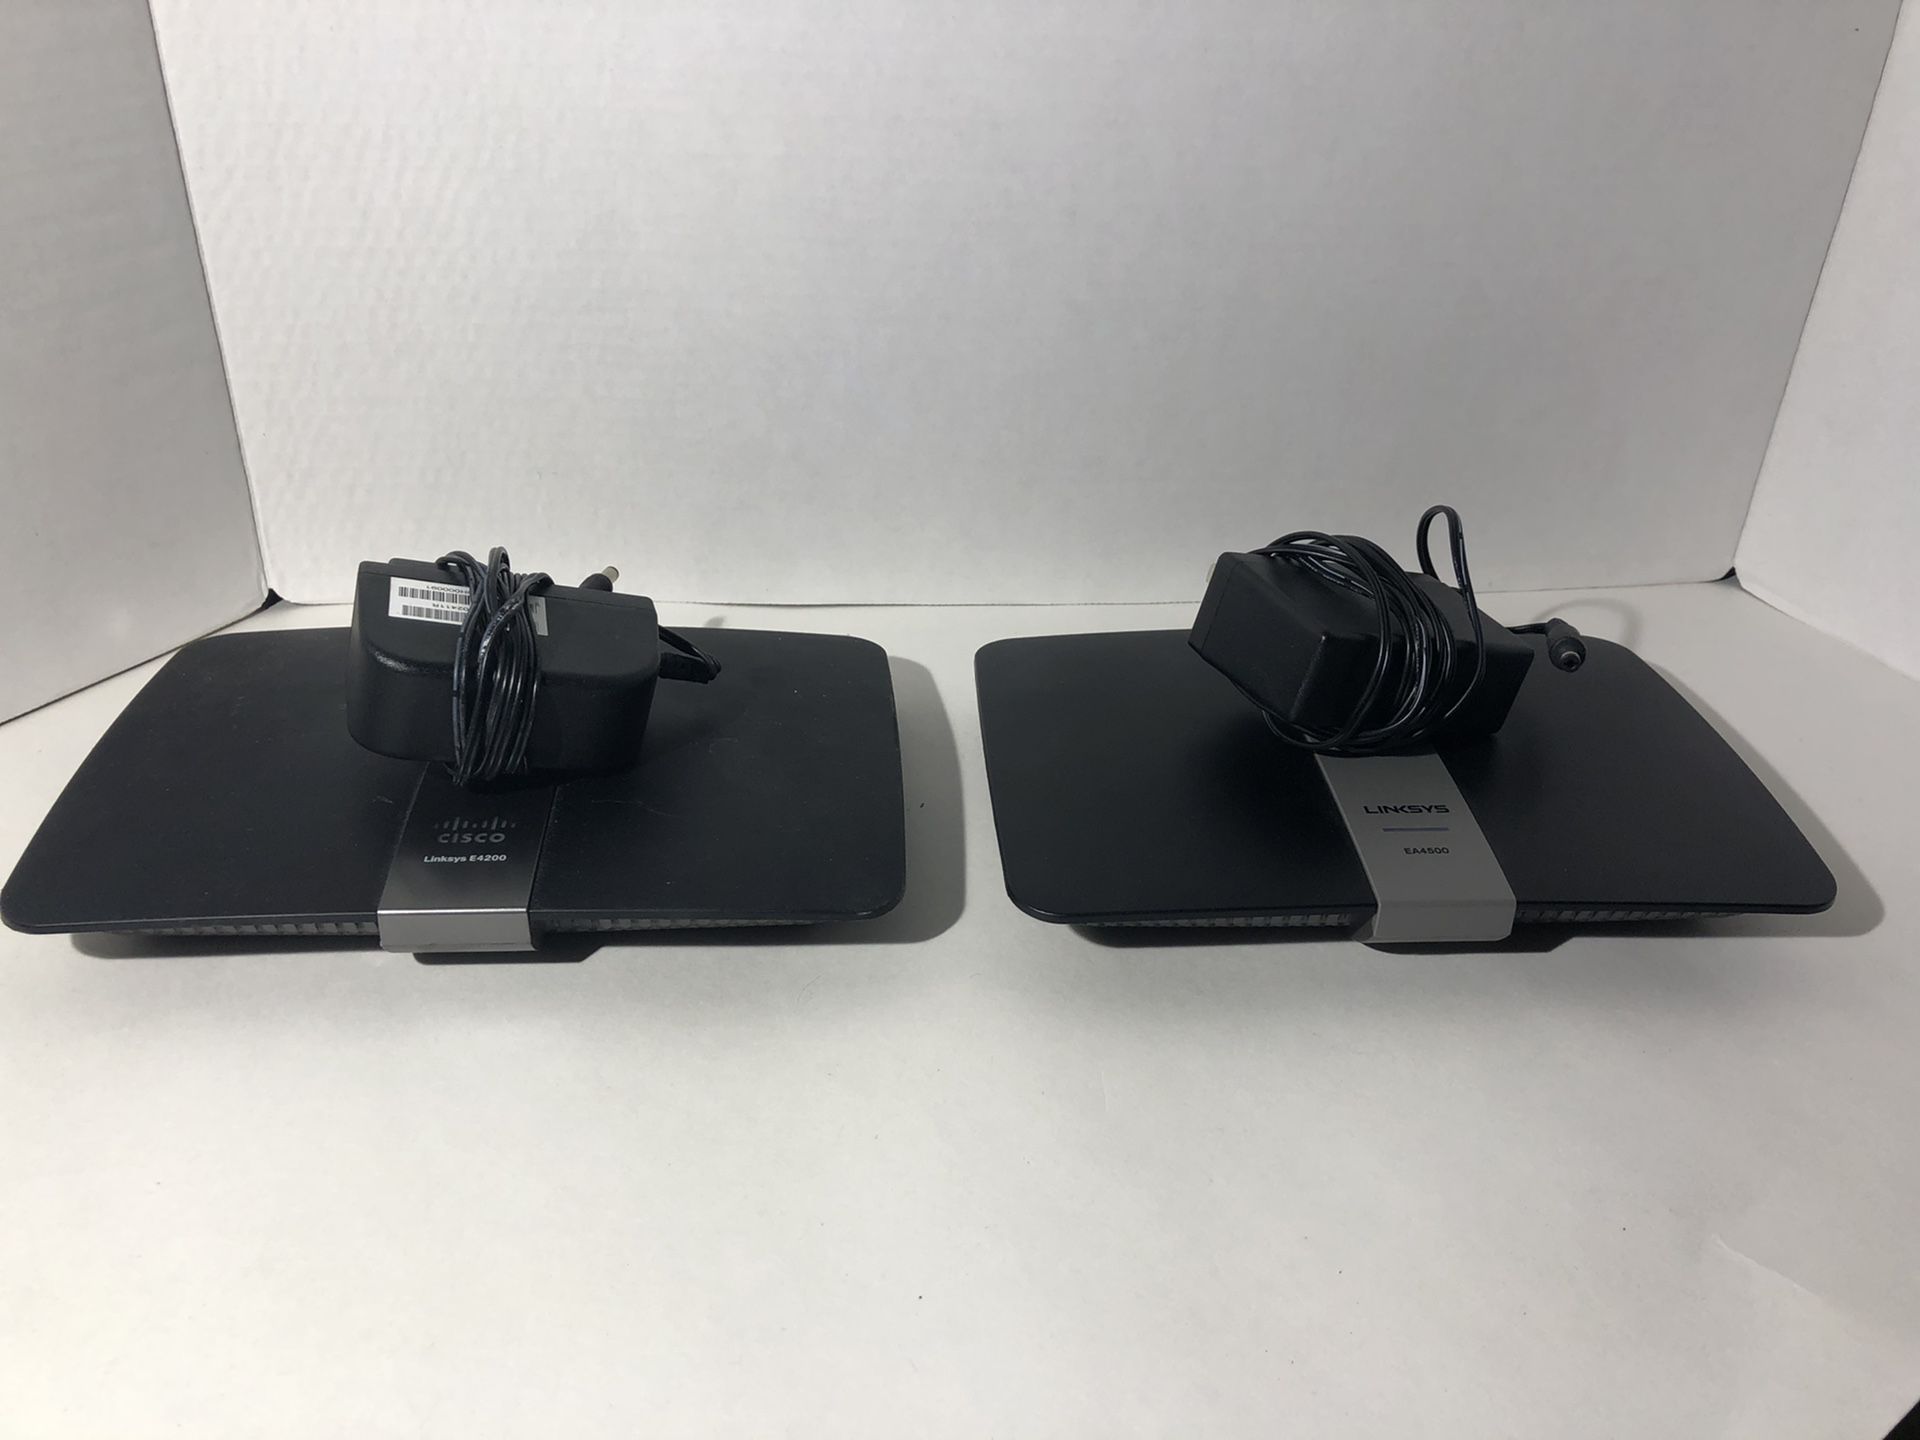 Lot of 2 - LINKSYS E4200 AND EA4500 Router